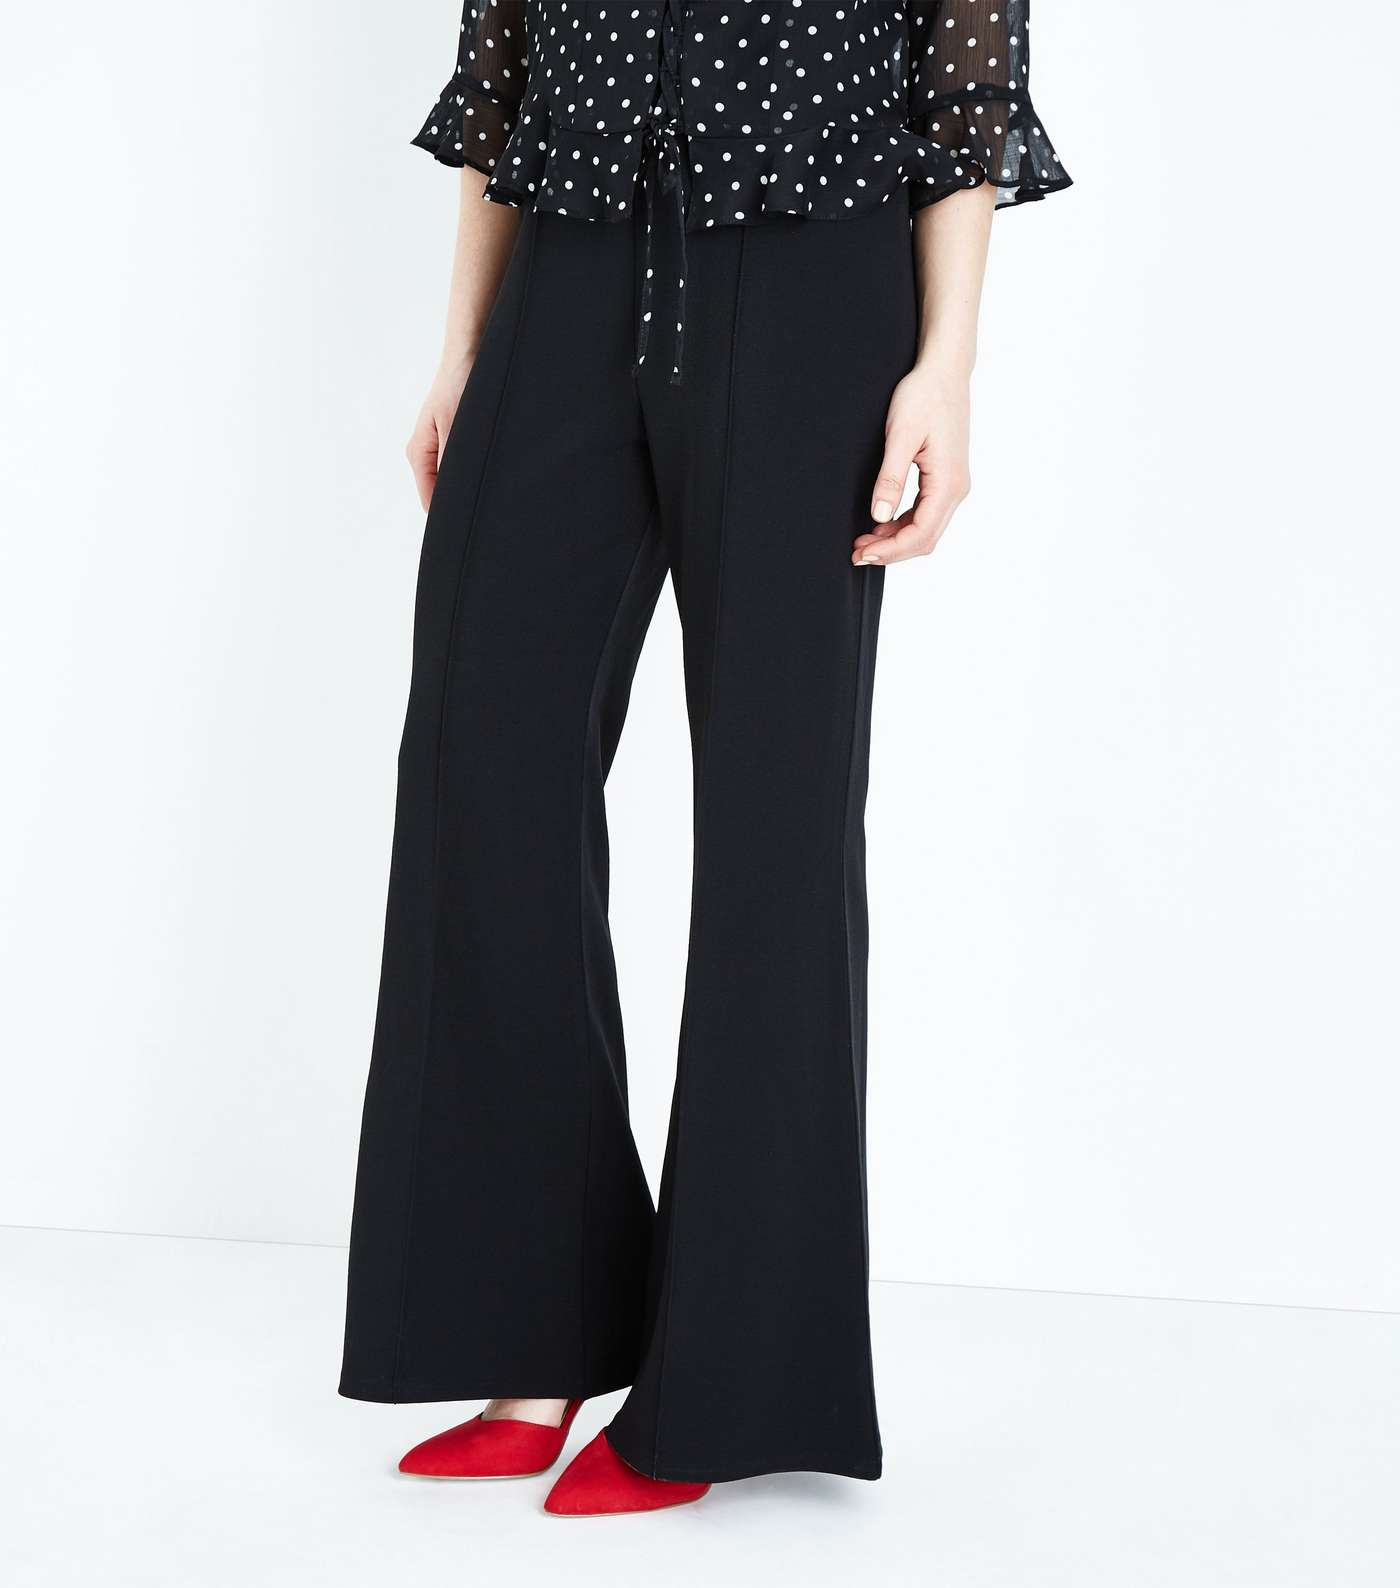 Cameo Rose Black Piped Flared Trousers Image 2